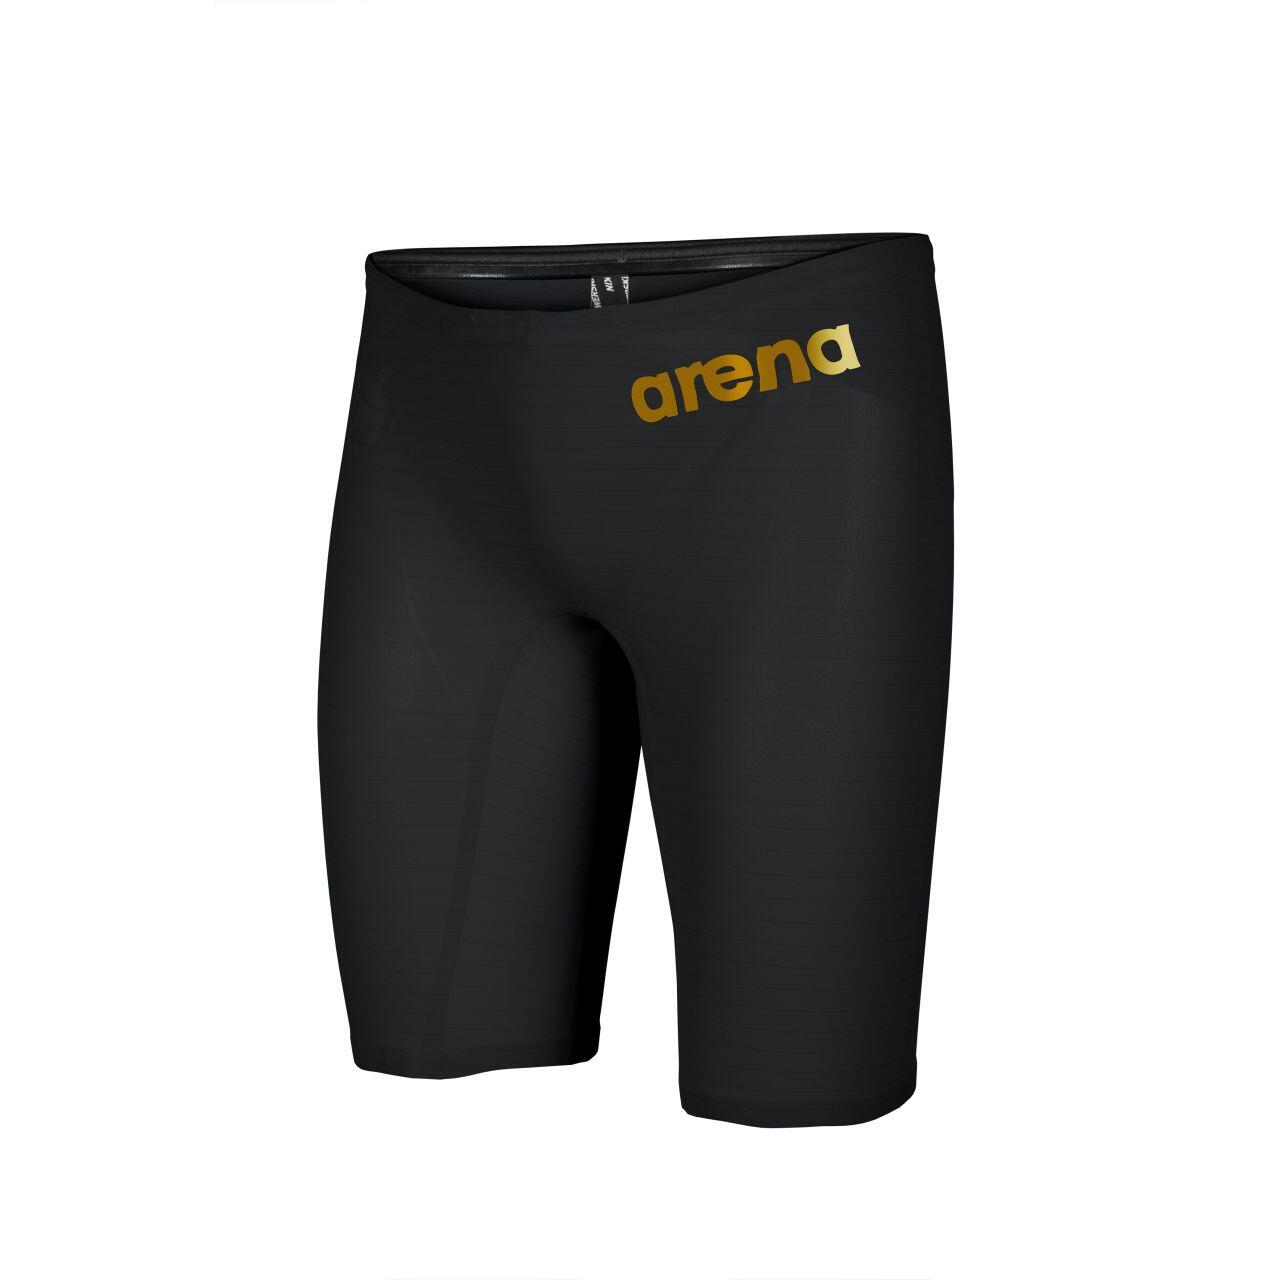 ARENA Arena Powerskin Carbon Air 2 Jammer - Black and Gold